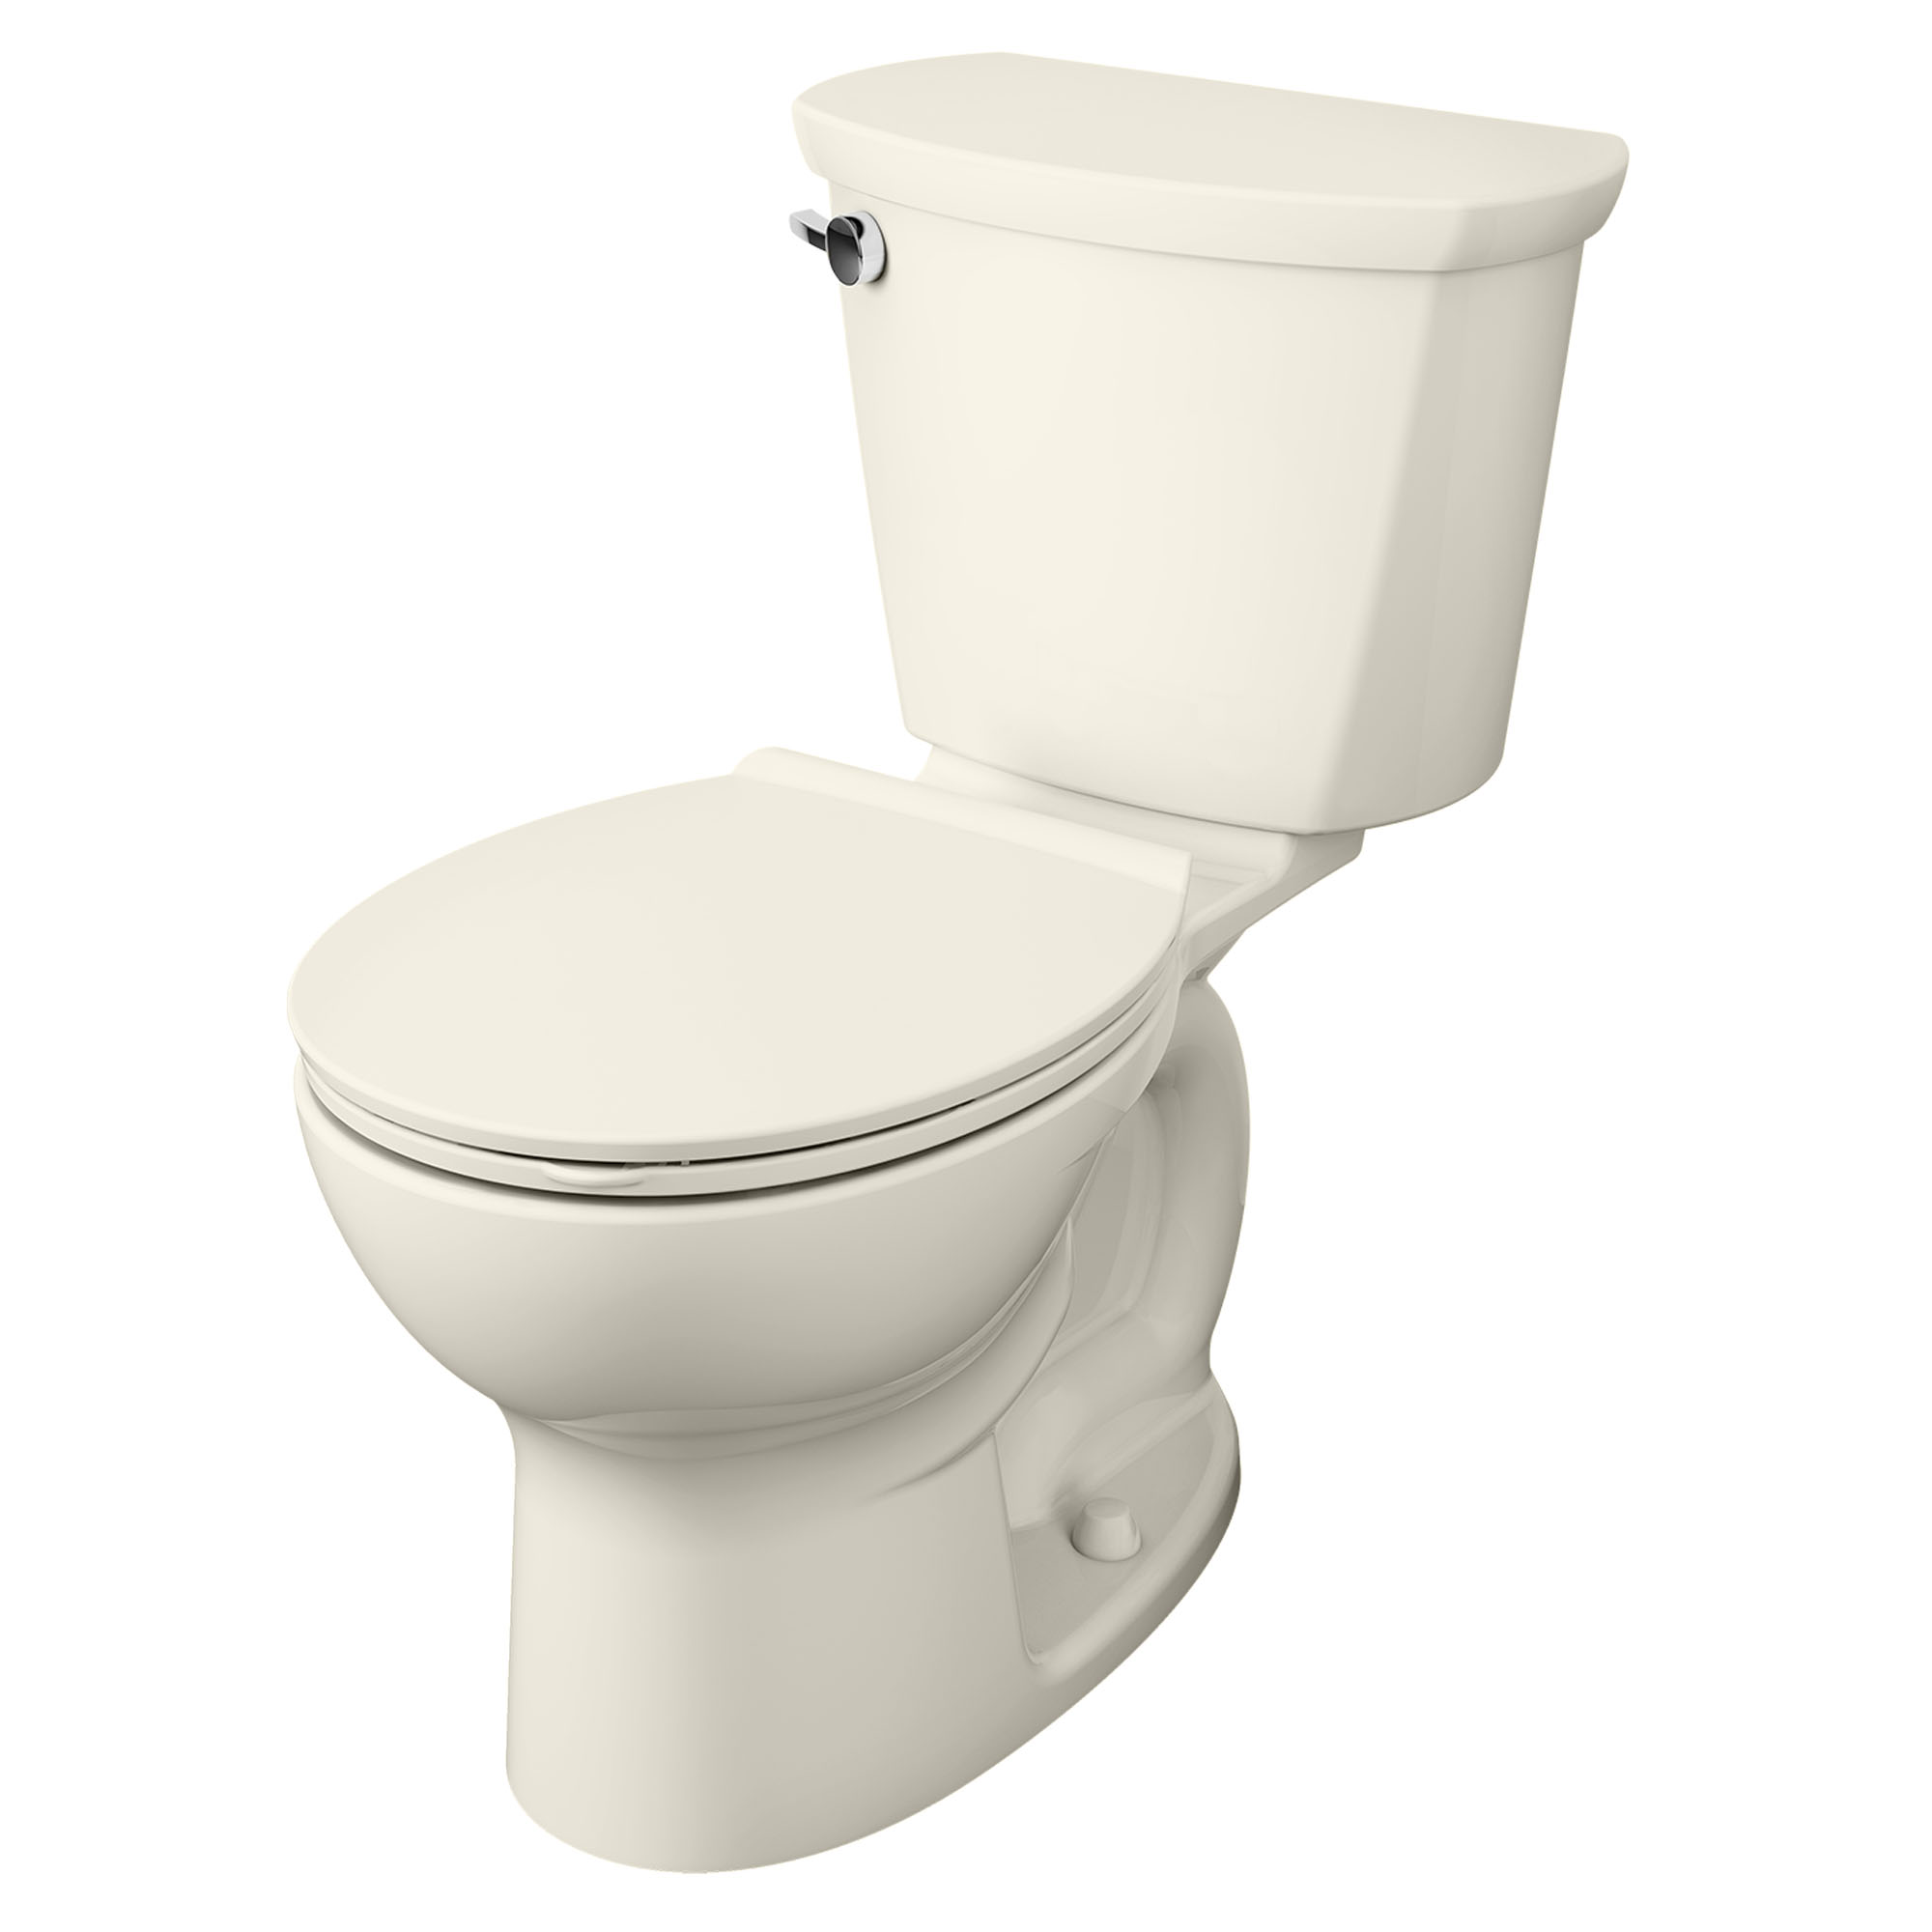 Cadet® PRO Two-Piece 1.6 gpf/6.0 Lpf Standard Height Round Front Toilet Less Seat